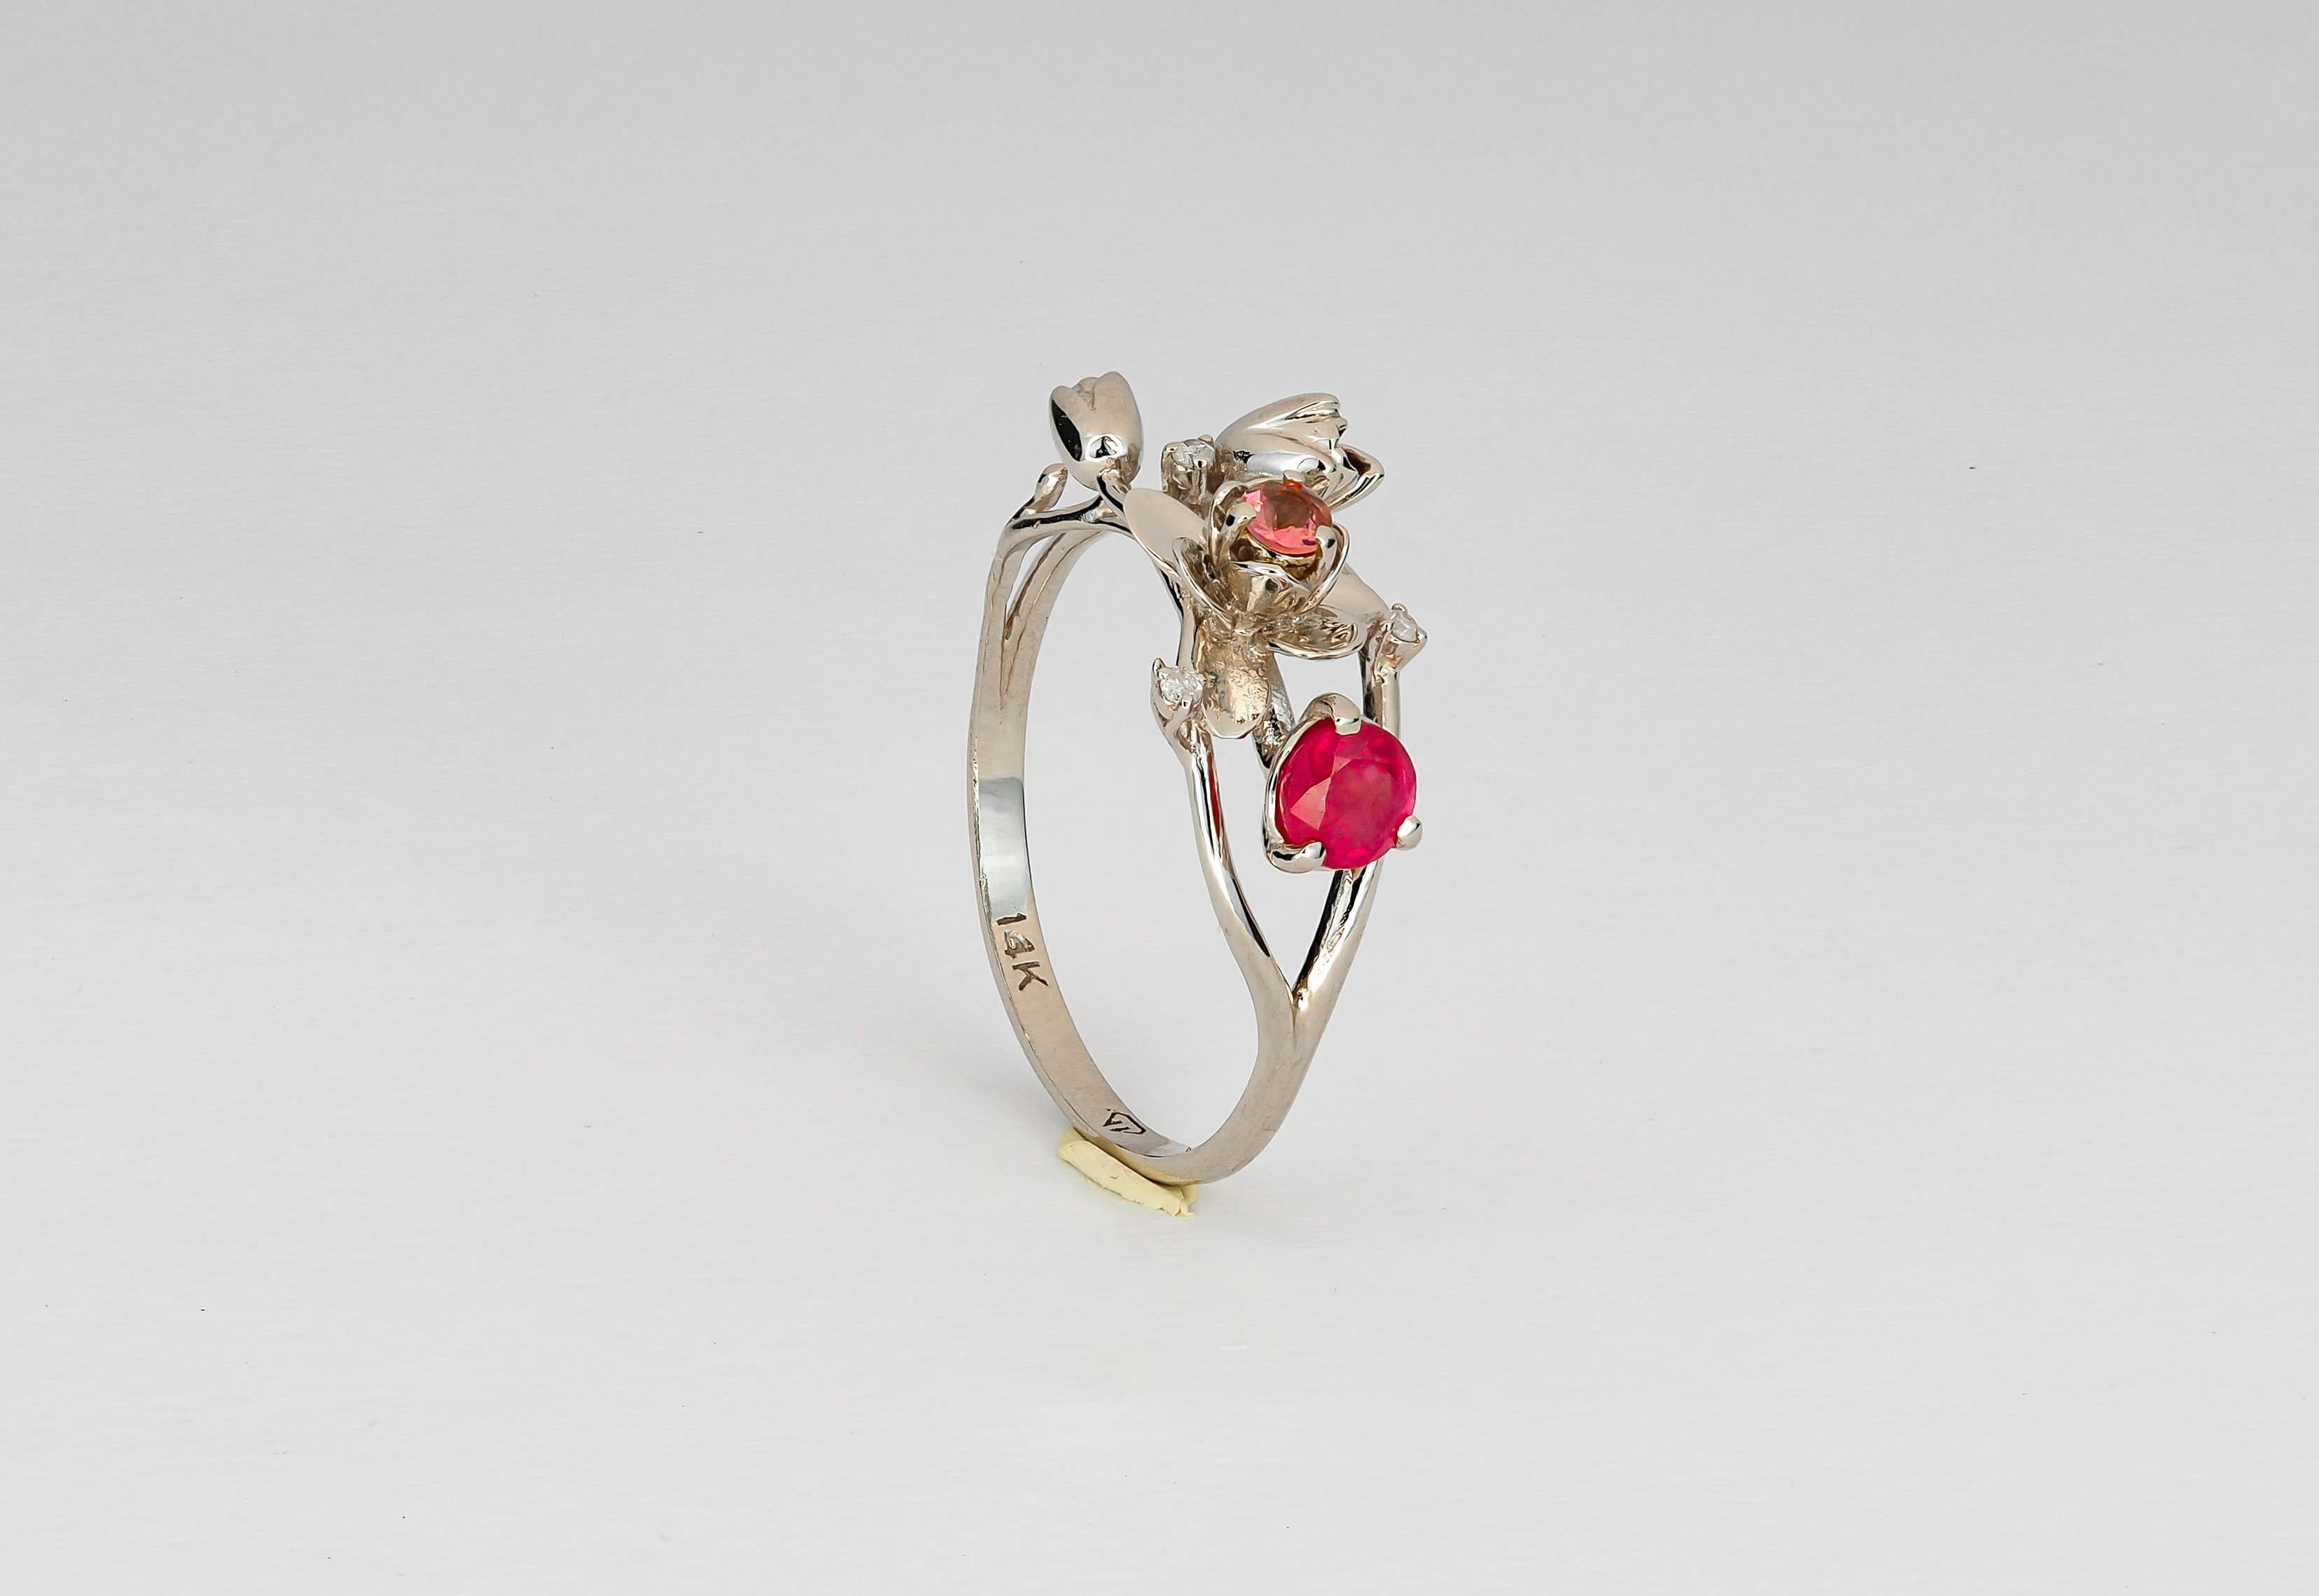 14 karat white gold ring with genuine ruby, sapphire and diamonds. Wild Orchid gold ring. July birthstone.
Weight: 2.2 g. depends from size
Central stone: Genuine ruby
Weight: 0.45 ct in total
Cabochon cut, color - red
Clarity: Transparent with